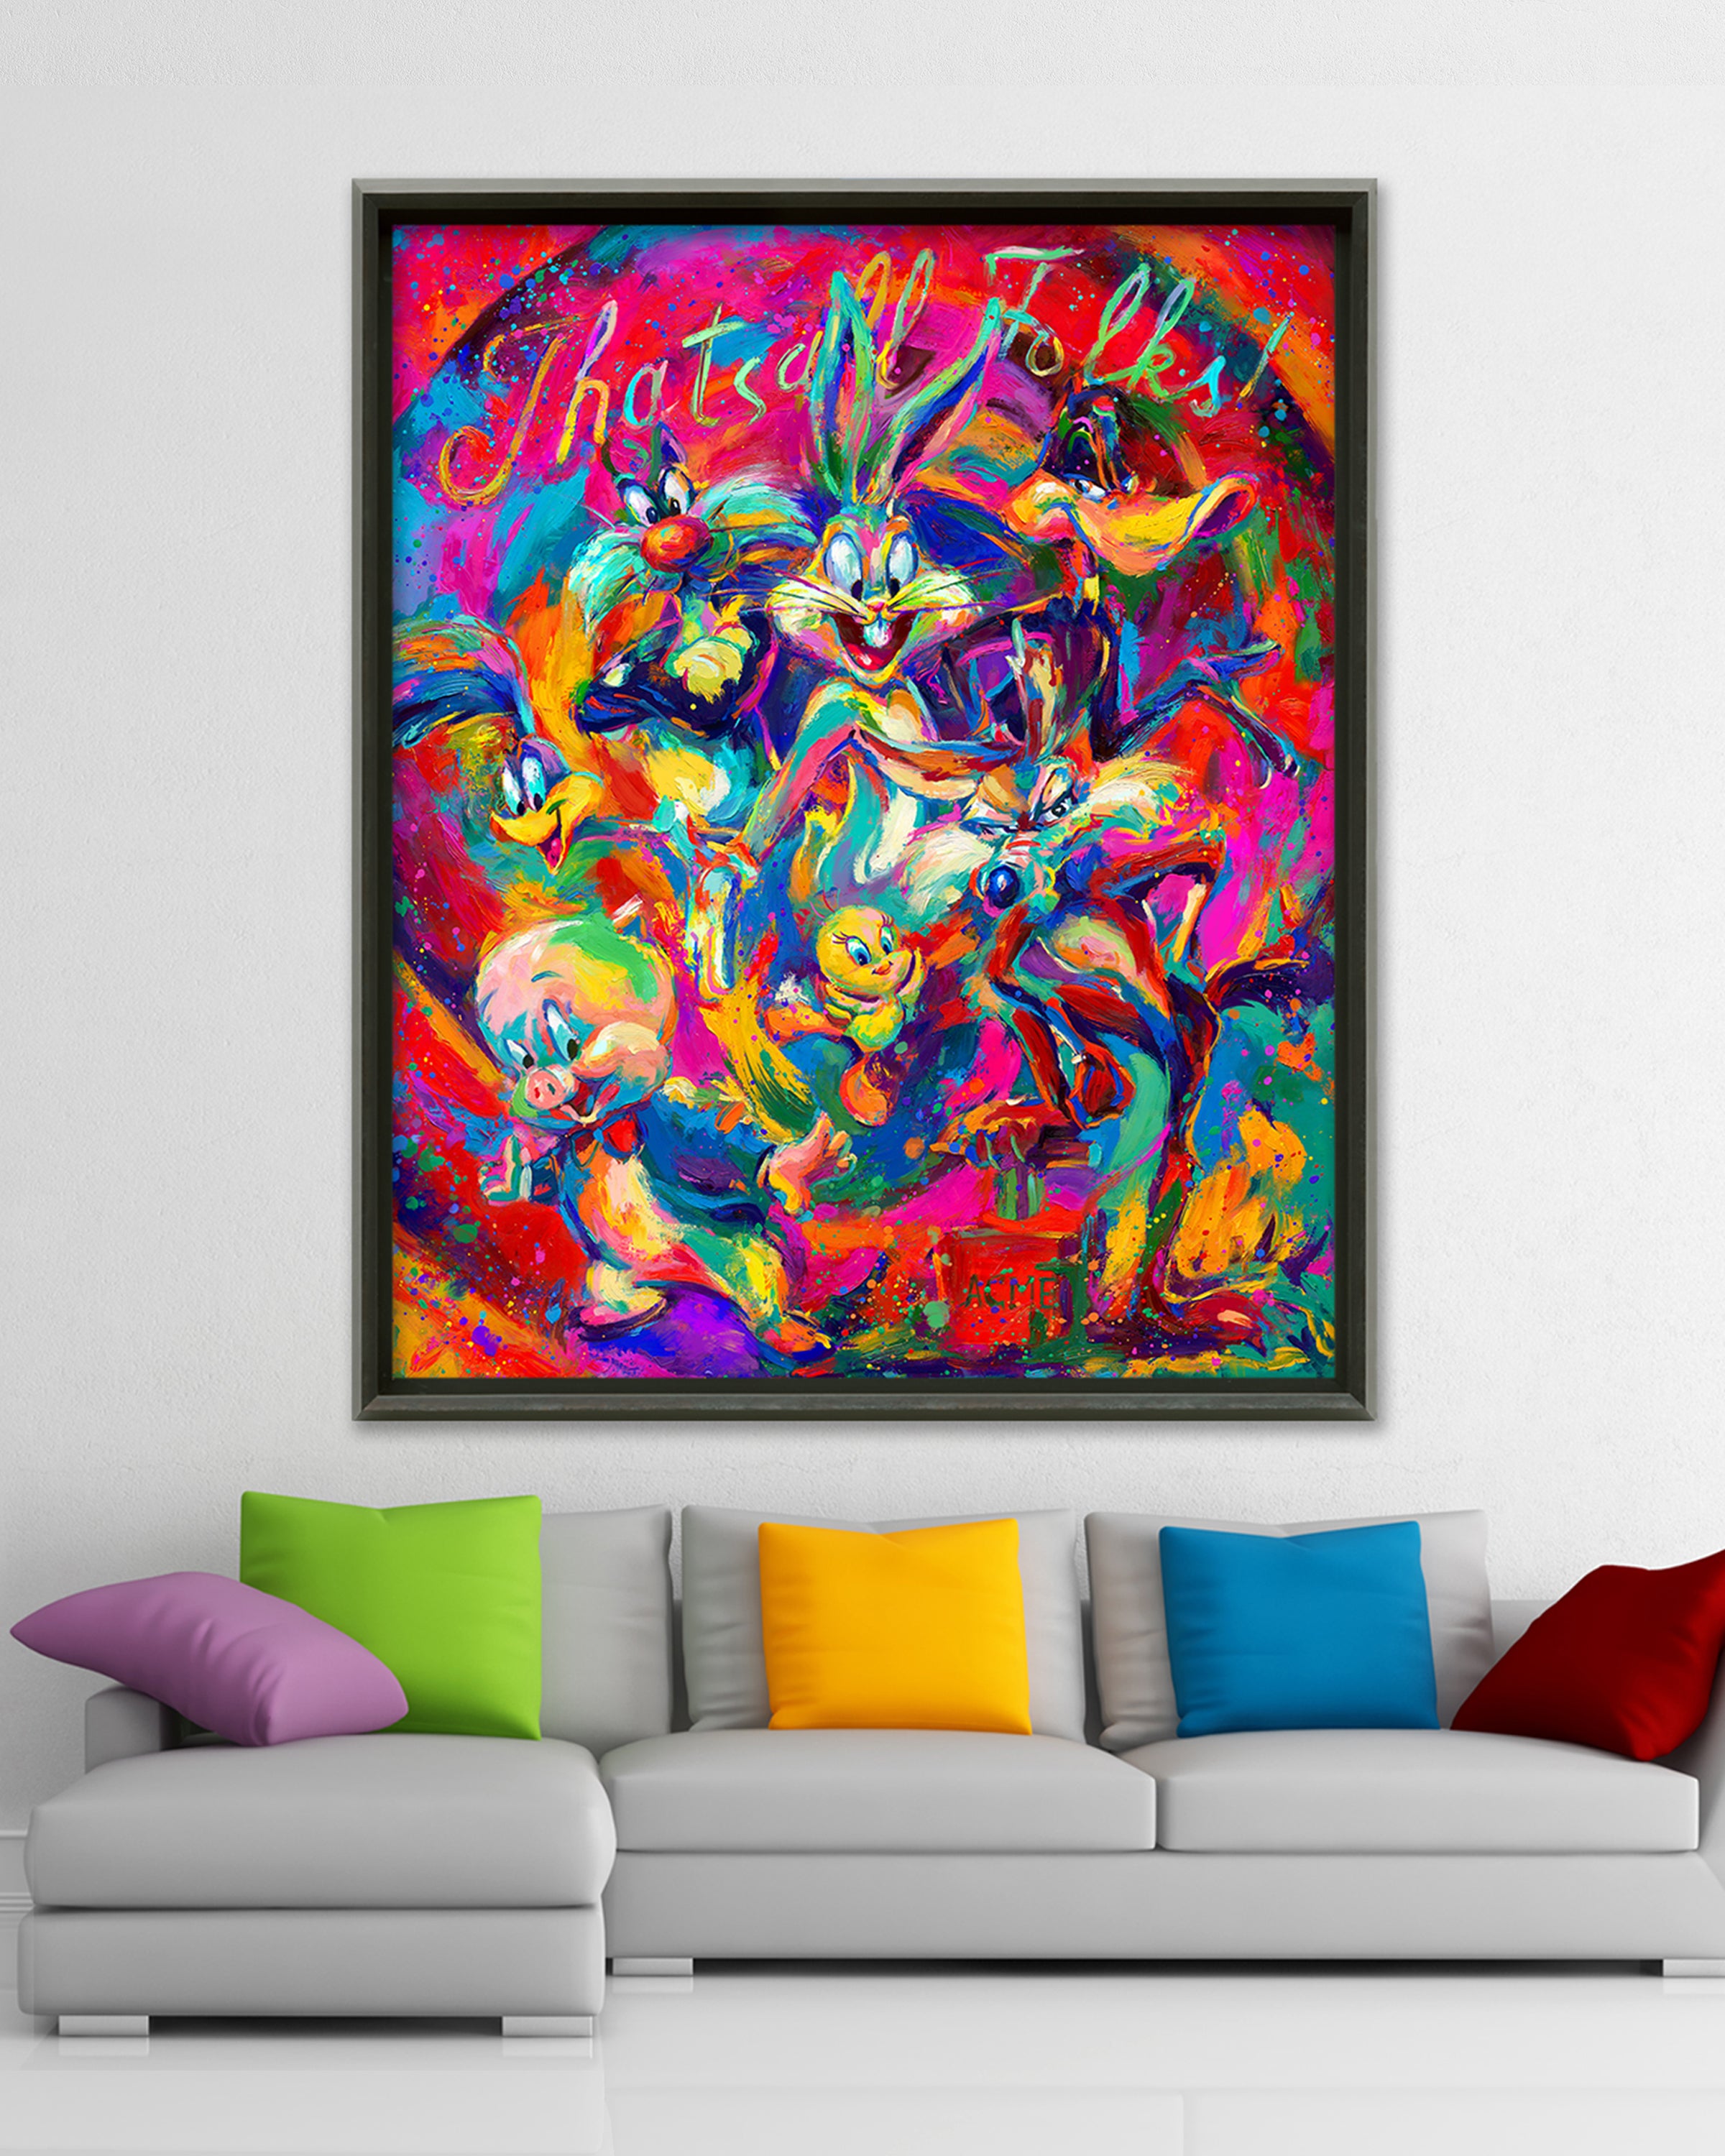 Oil on canvas original painting of the Warner Brother's cast of Looney Tunes characters, from Bugs Bunny, Wile E. Coyote, Daffy Duck and Tweety to Road Runner, Porky Pig and Sylvester, they are all together swirling in color while That's All Folks reads behind them, in colorful brushstrokes, color expressionism style in a room setting.